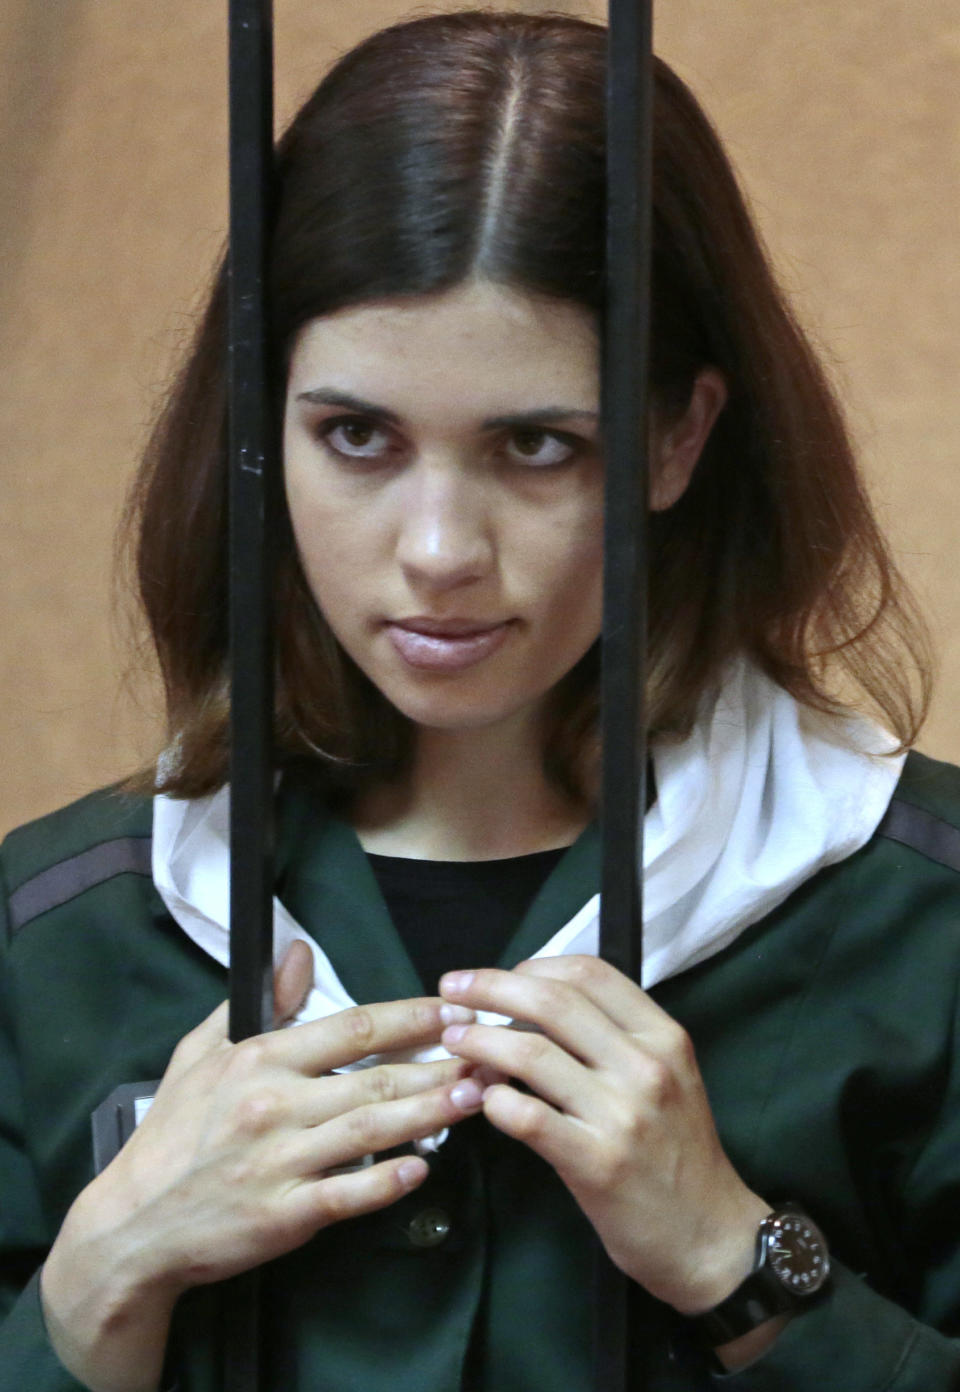 In this Friday, April 26, 2013 file photo, Nadezhda Tolokonnikova, a member of the feminist punk band Pussy Riot, listens from behind bars at a district court in Zubova Polyana, 440 kilometers (273 miles) southeast of Moscow, in Russia's province of Mordovia. (AP Photo/Mikhail Metzel, file)